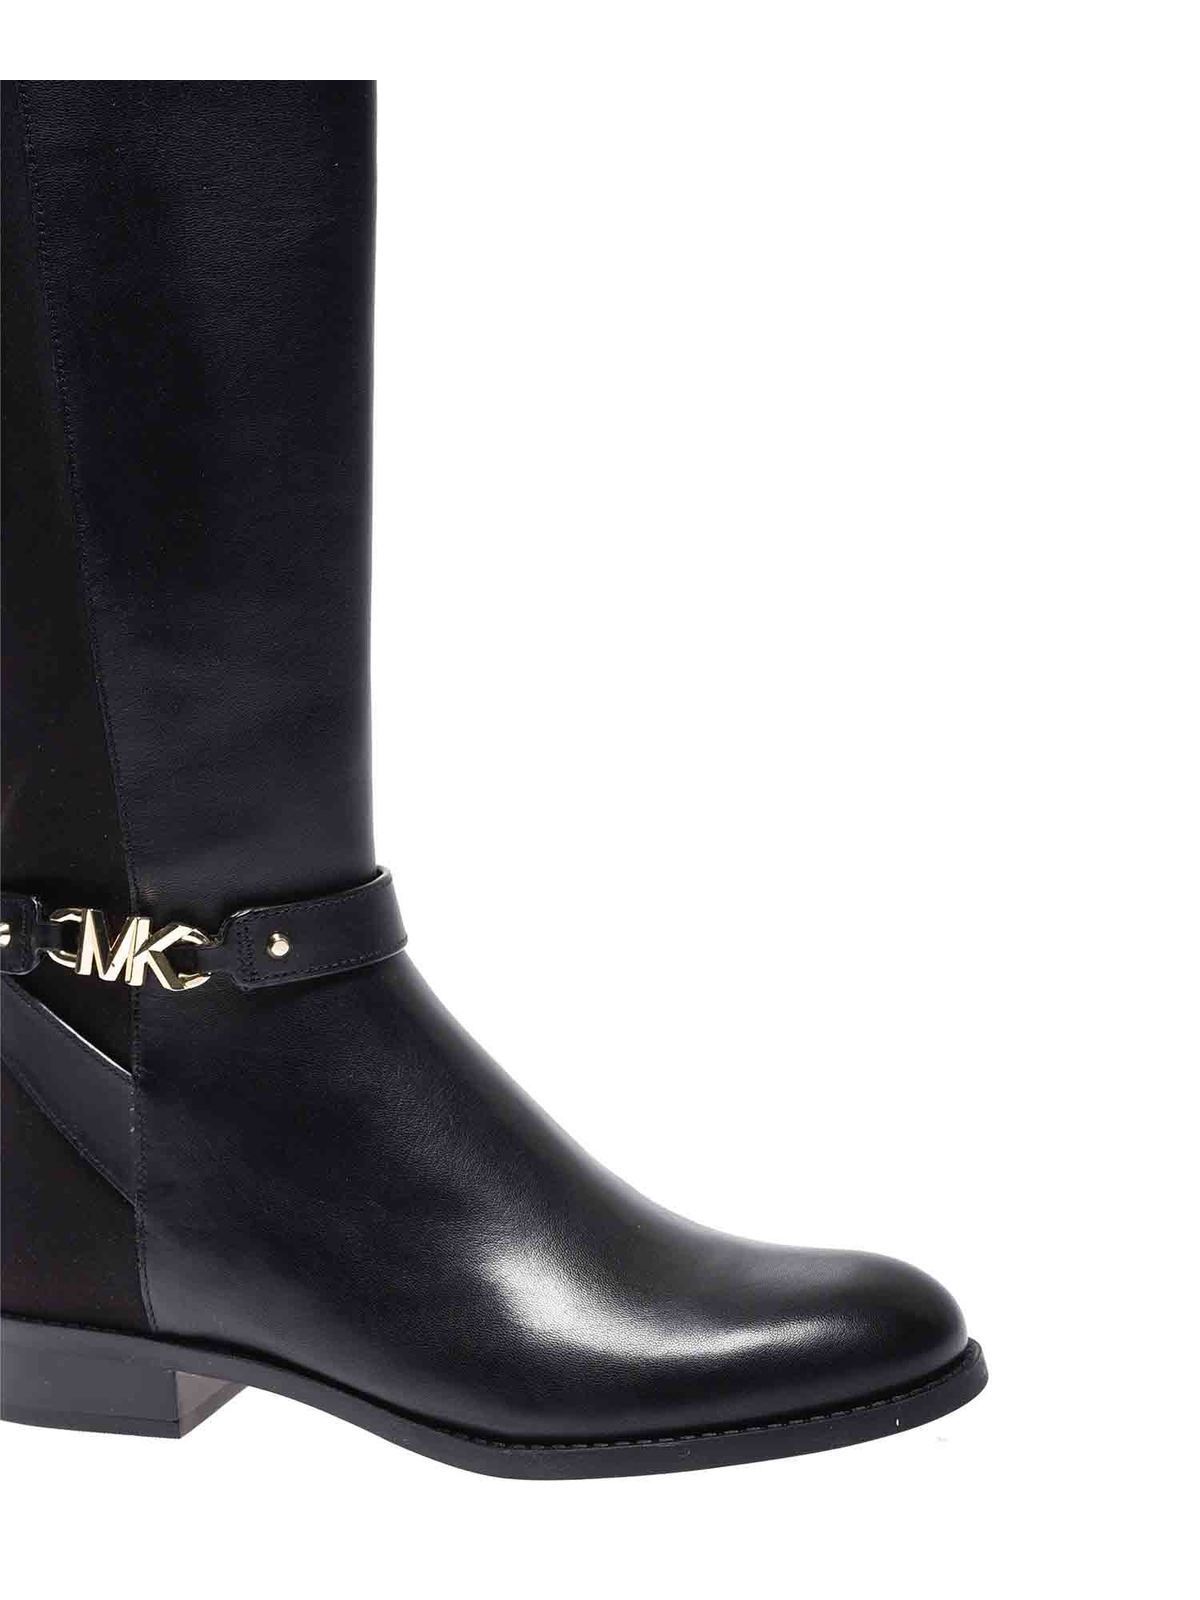 Ankle boots Michael Kors - Farrah boots in black - 40F1FHFB5L001